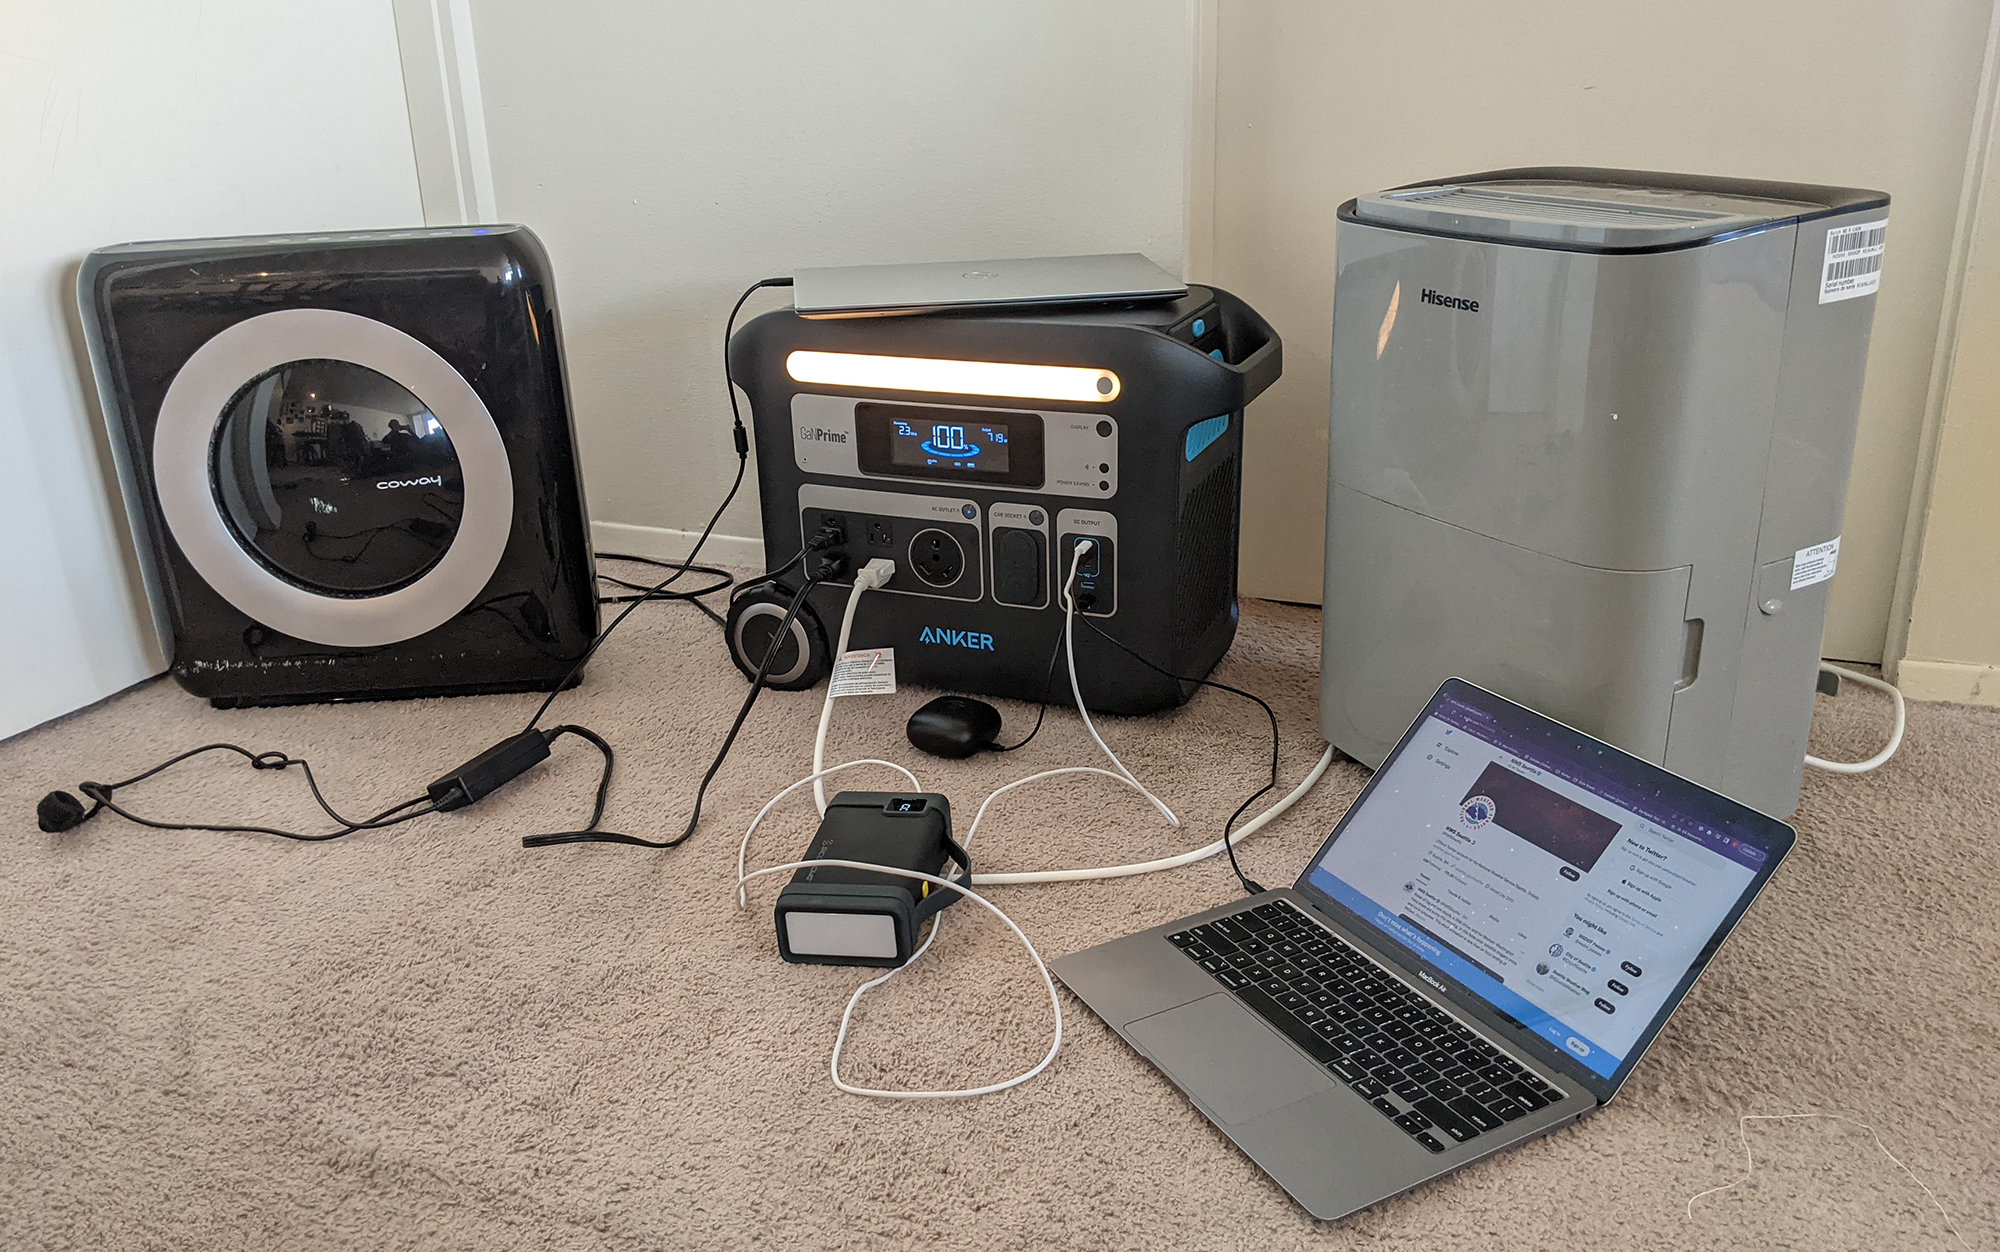 Trying to make a dent in the Anker 767’s output capacity with a dehumidifier, air purifier, two laptops, a battery pack, a pair of headphones, and turning the light on the station up and down using the Anker app. 